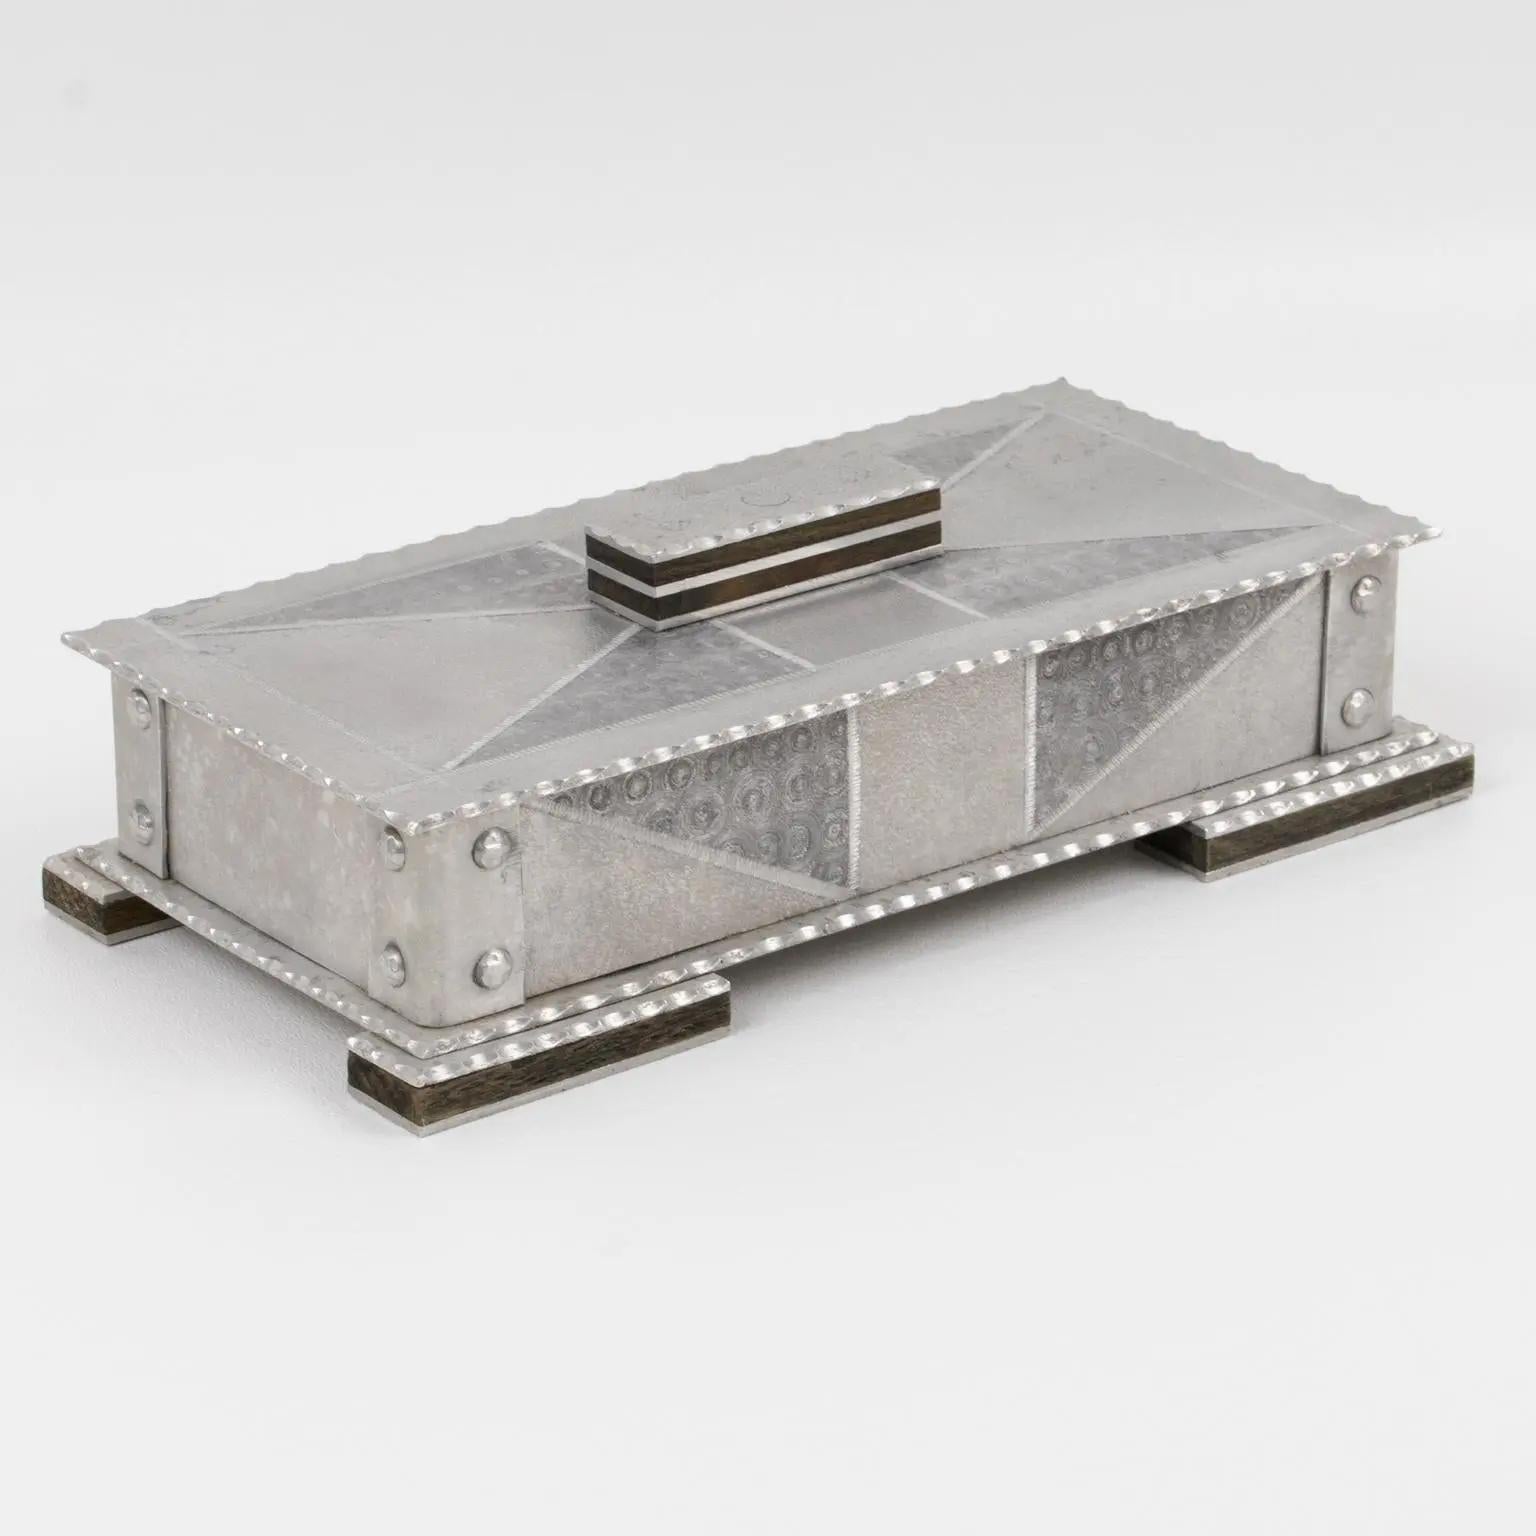 This is a stunning decorative aluminum box from the early 20th century. The design boasts wood detailing and a modernist industrial Bauhaus or Arts & Crafts shape. It is a large rectangular shape with a geometric textured pattern on it. The box is